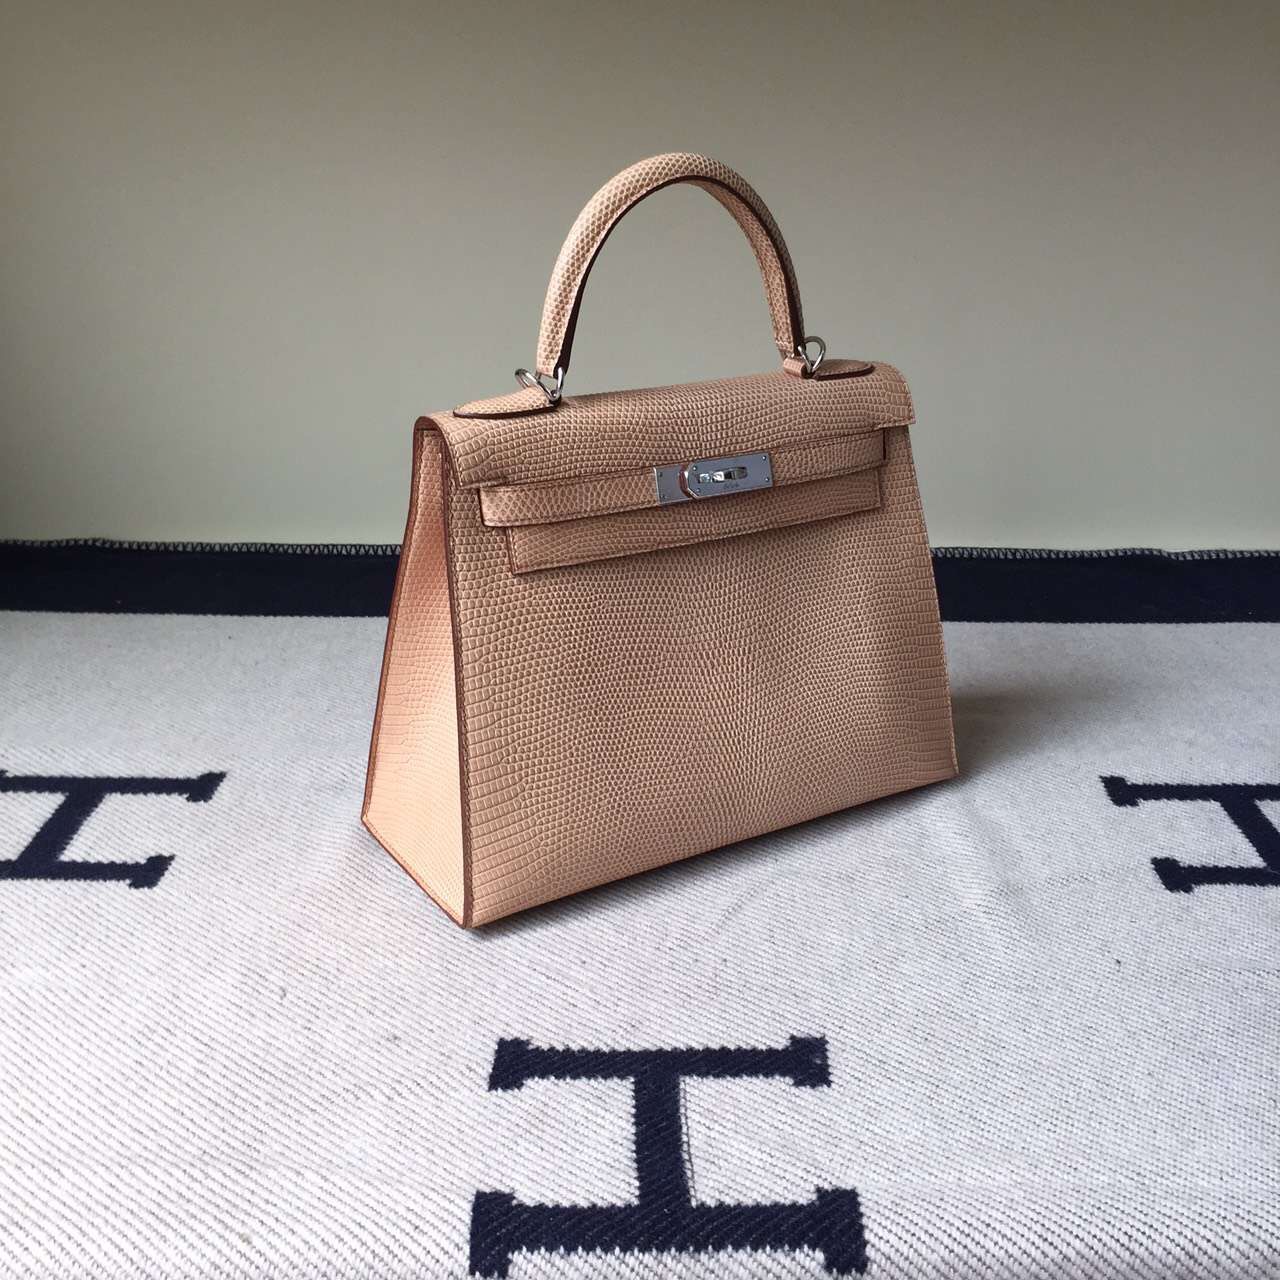 Cheap Hermes Apricot Lizard Leather Sellier Kelly Bag 28CM